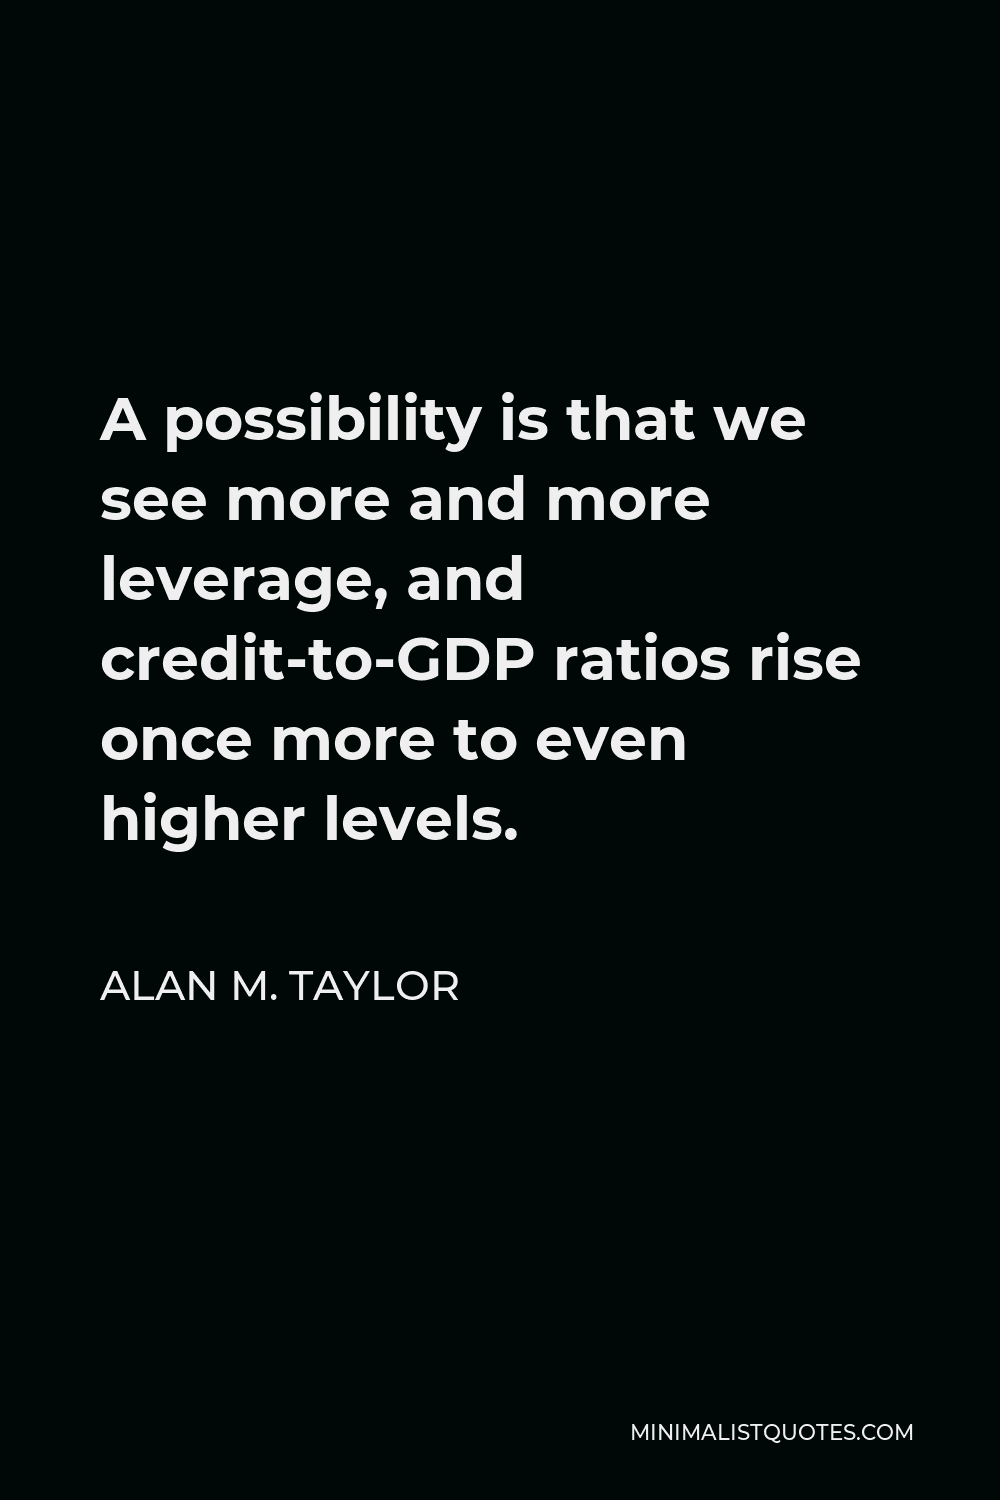 Alan M. Taylor Quote - A possibility is that we see more and more leverage, and credit-to-GDP ratios rise once more to even higher levels.